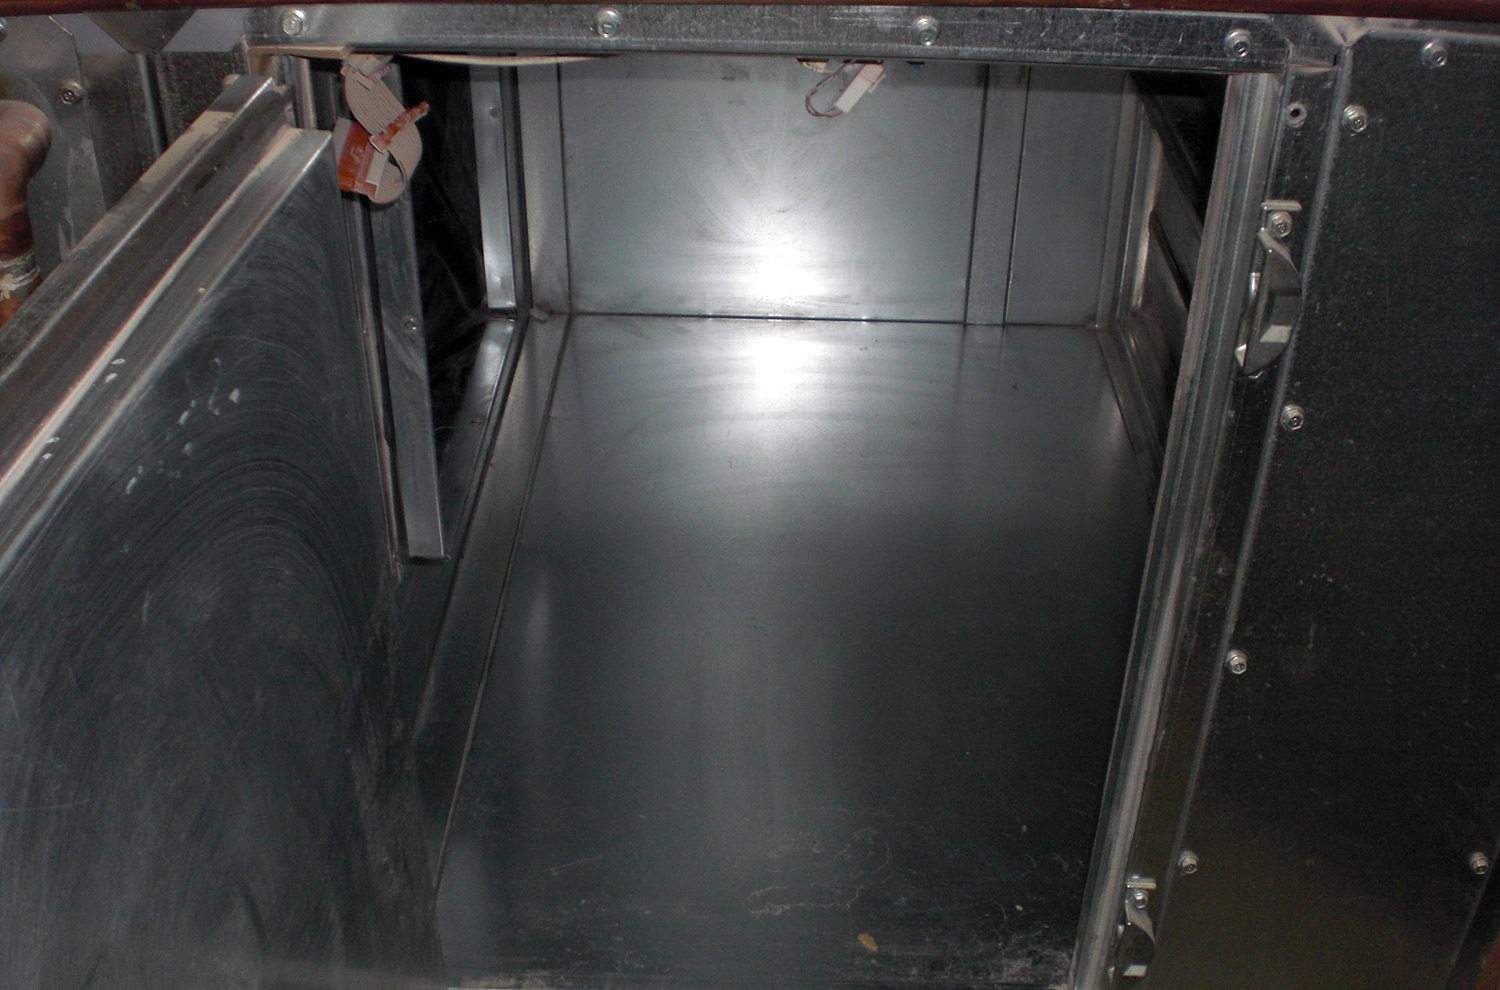 Ductwork passage cleaned and sanitized by TERS Environmental Restoration experts